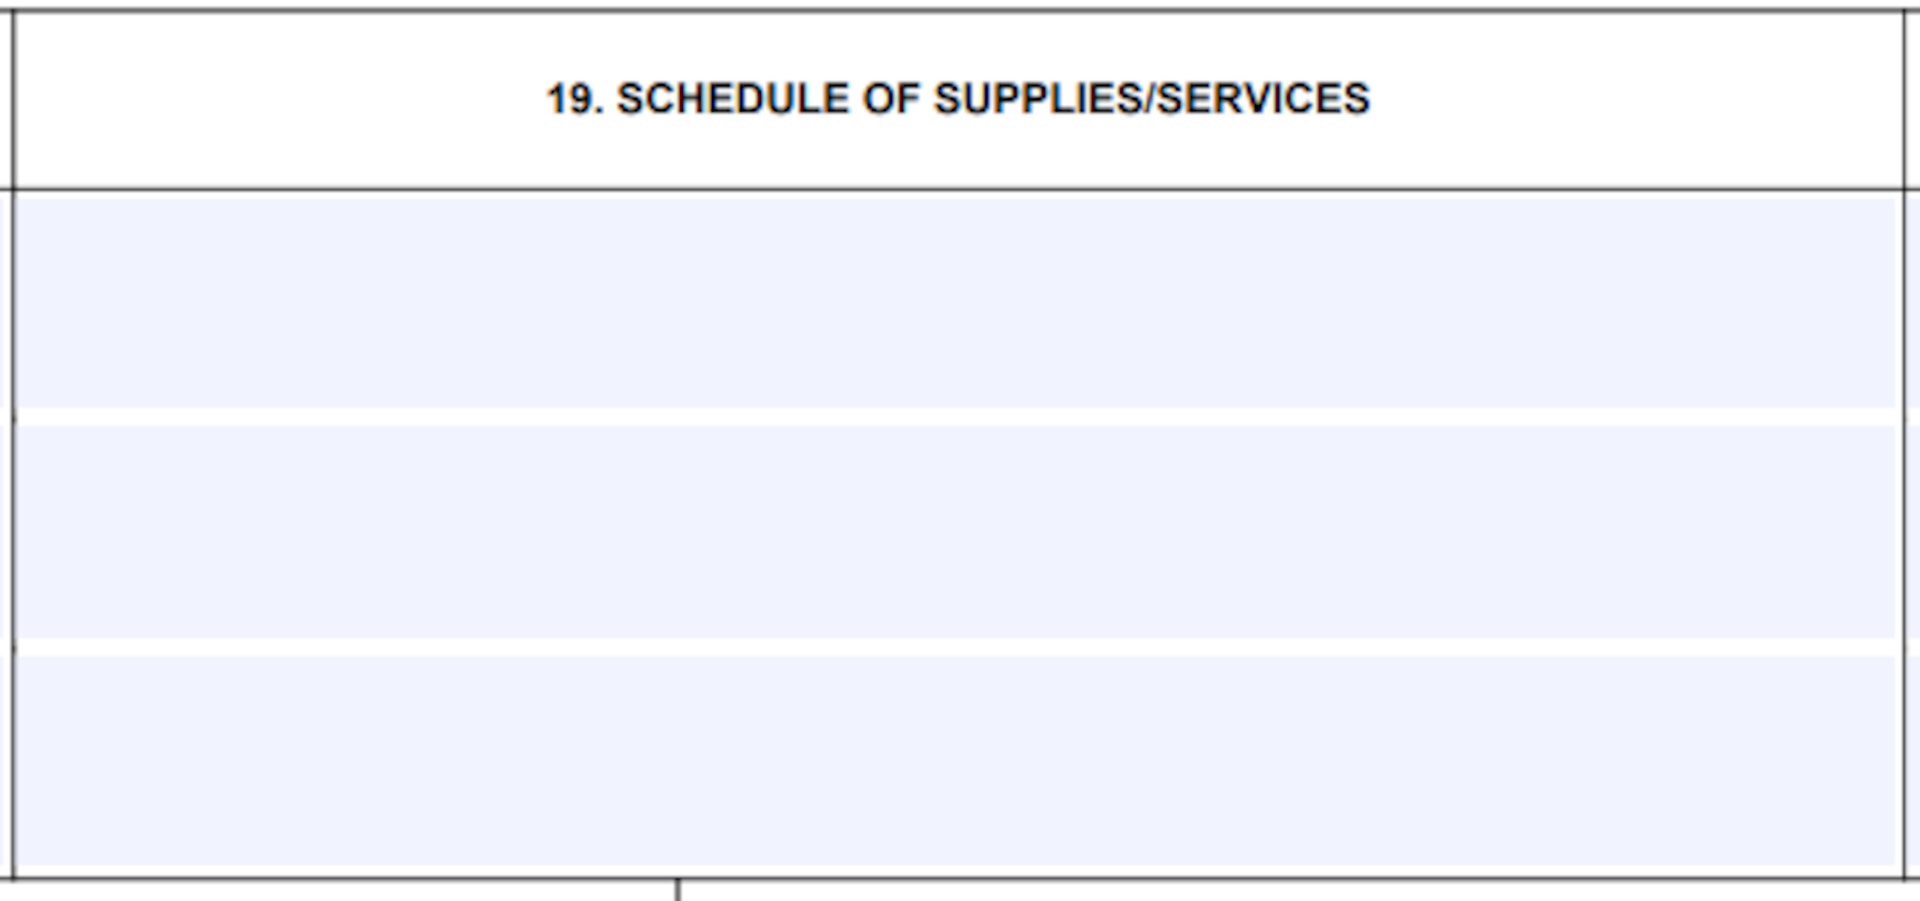 Box 19 of the Order for Supplies or Services (DD1155 Form) for Schedule of Supplies/Services for the line item in the order